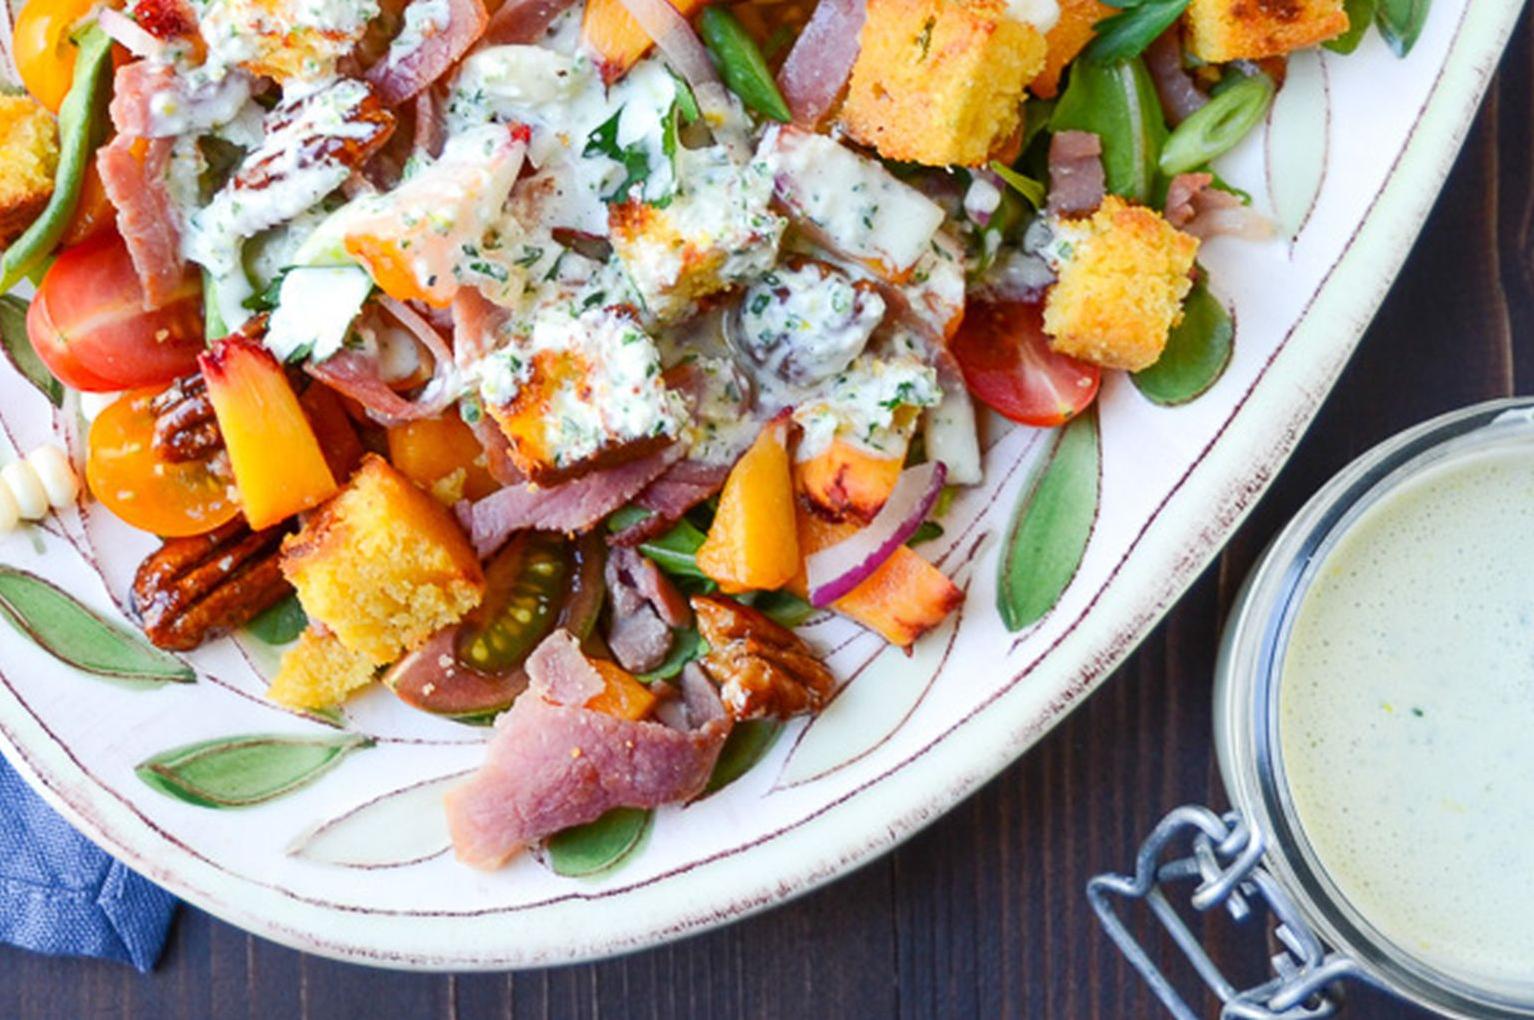  This salad is a perfect summer side dish that is sure to impress.